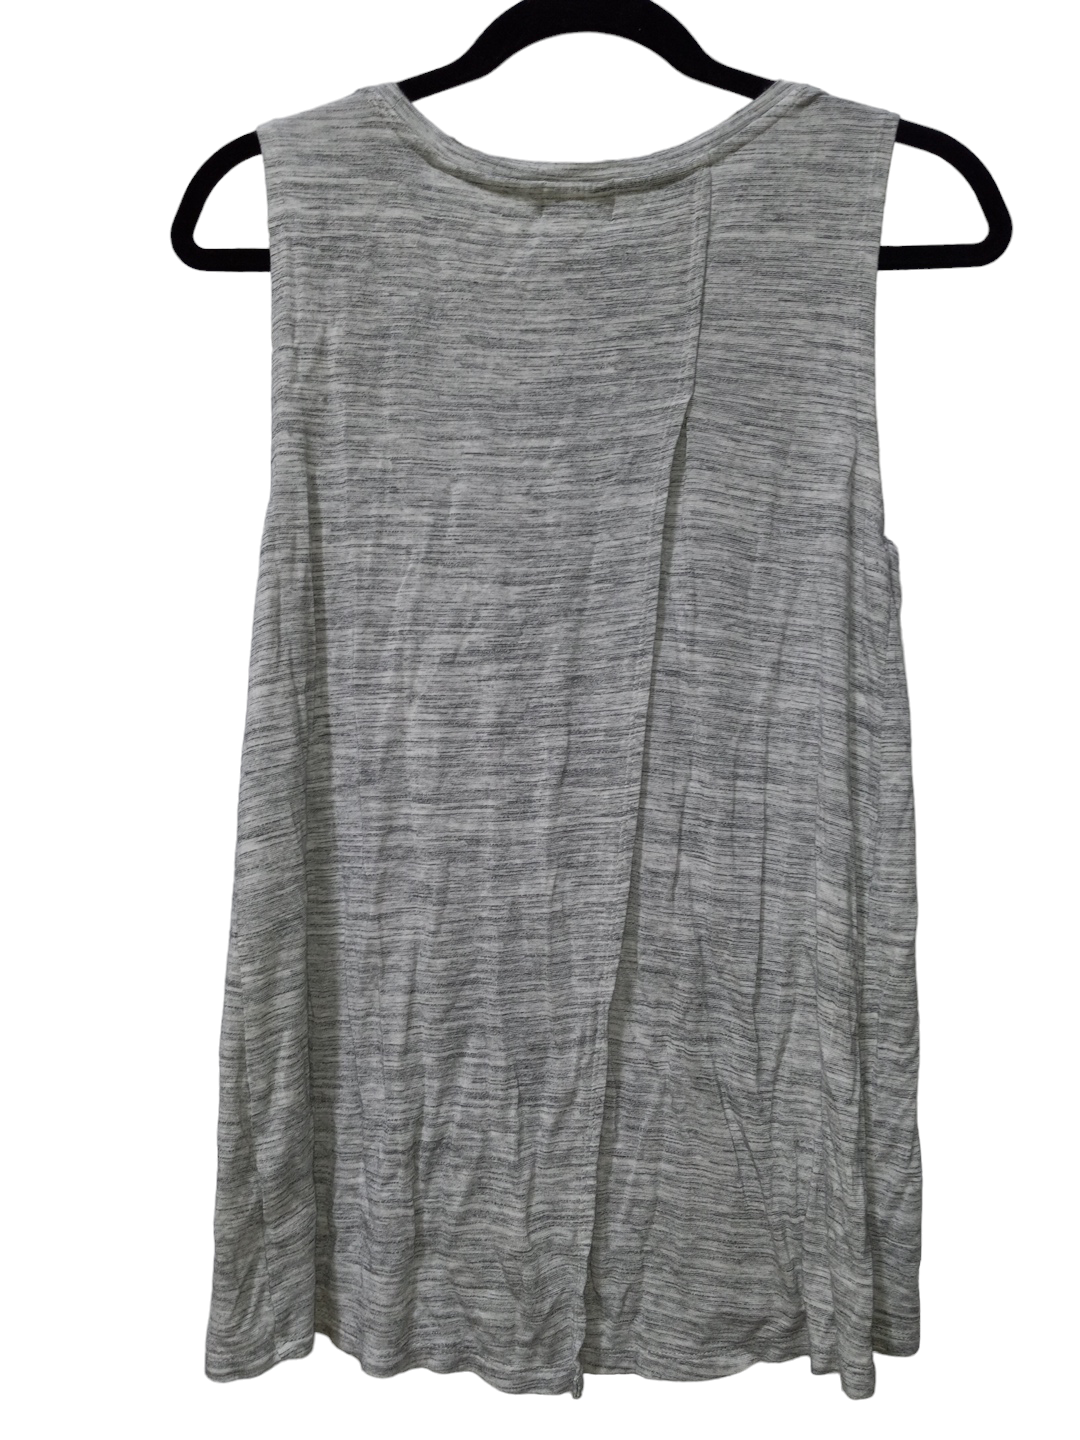 Grey Athletic Tank Top Old Navy, Size S